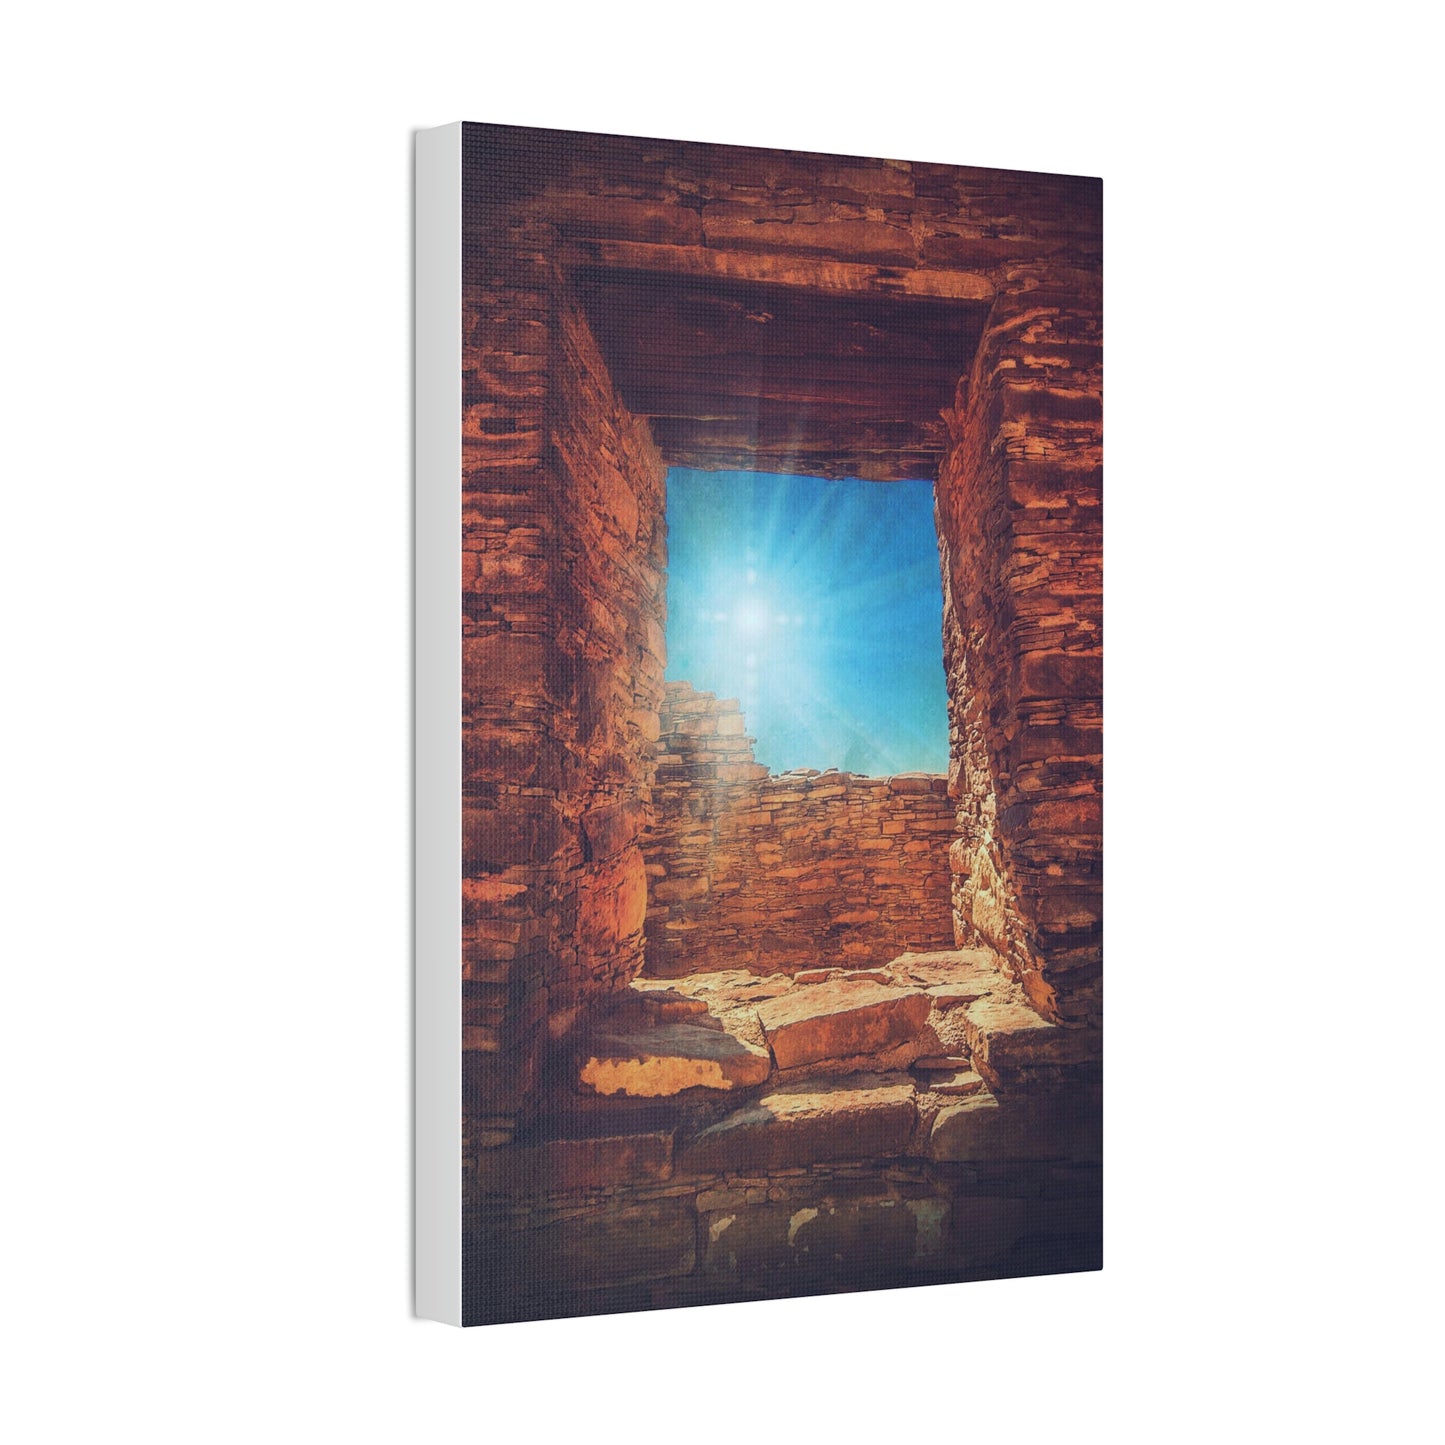 The Ruins - Canvas